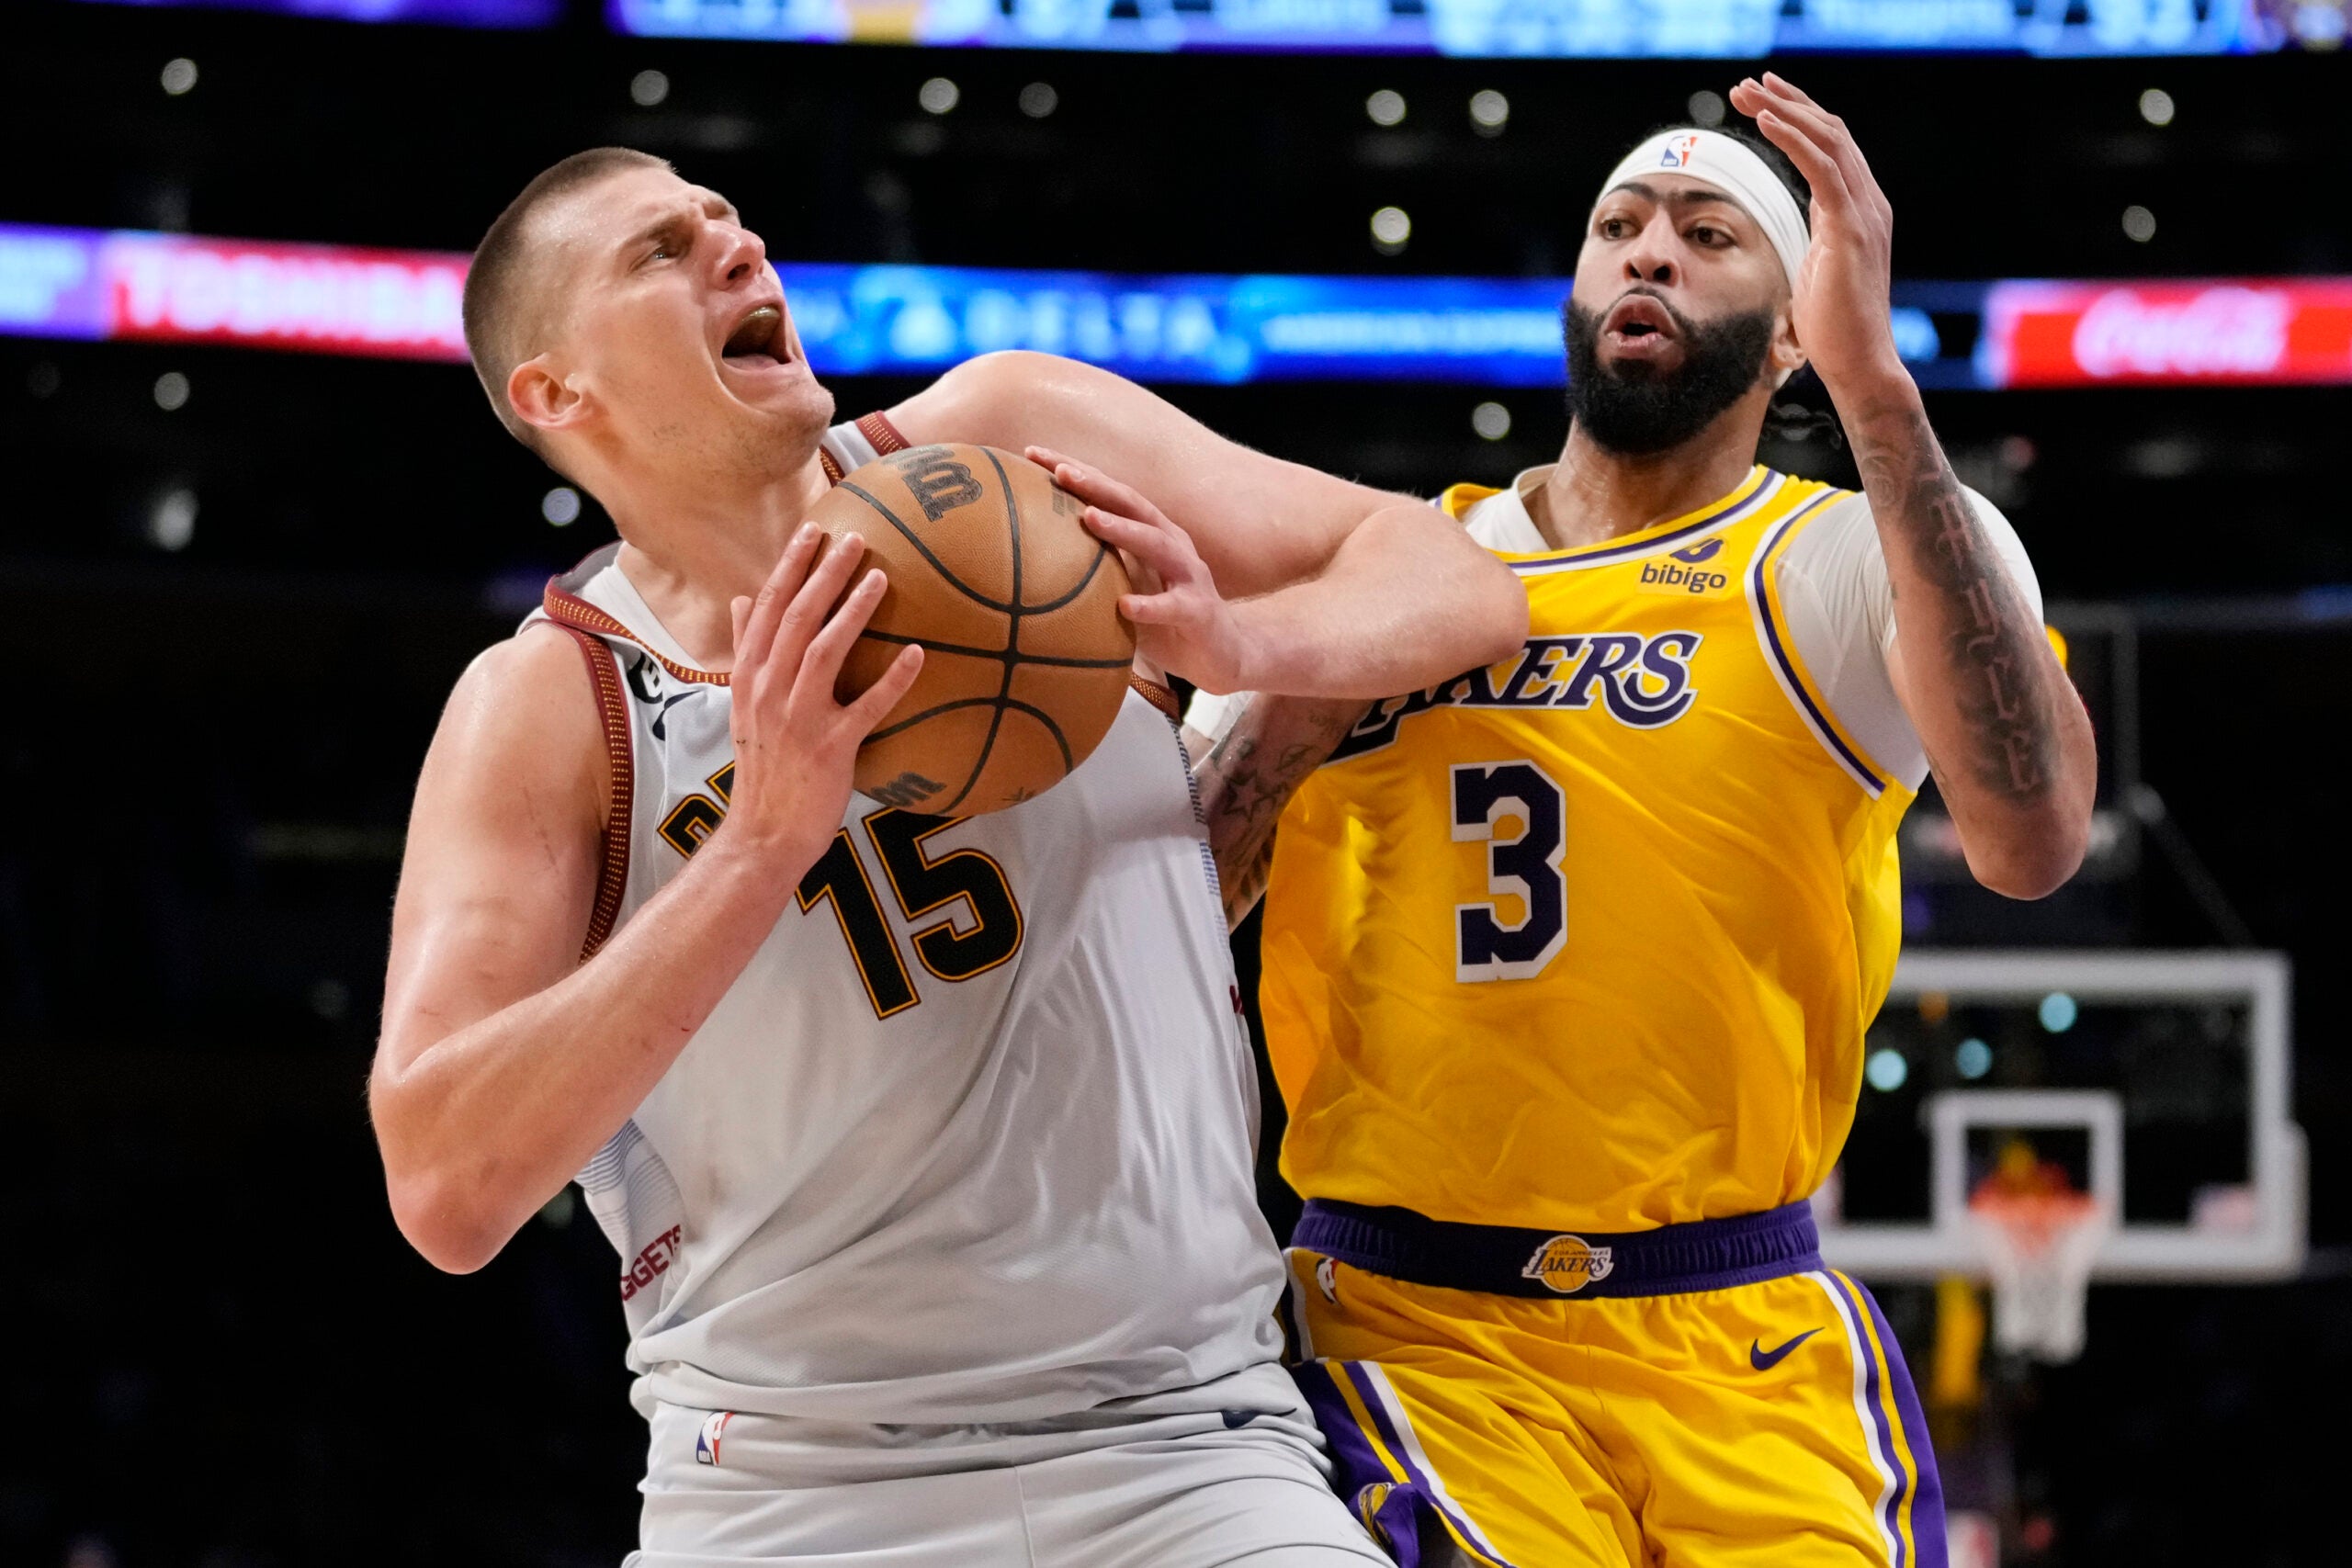 Denver Nuggets center Nikola Jokic (15) is defended by Los Angeles Lakers forward Anthony Davis (3) in the second half of Game 4 of the NBA basketball Western Conference Finals.